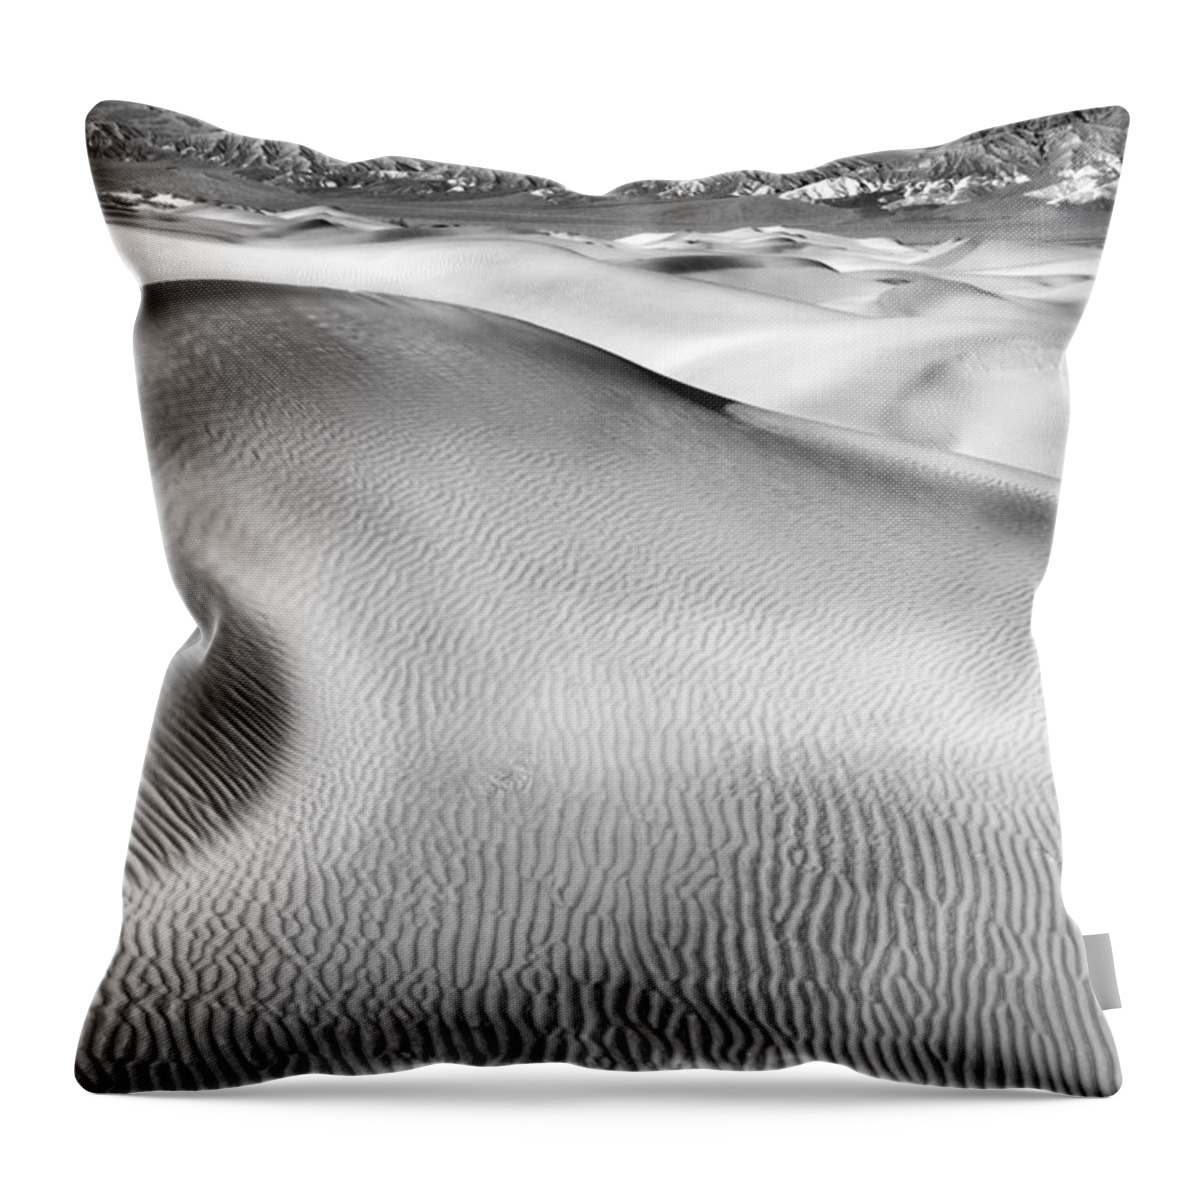 California Throw Pillow featuring the photograph Without Life by Jon Glaser